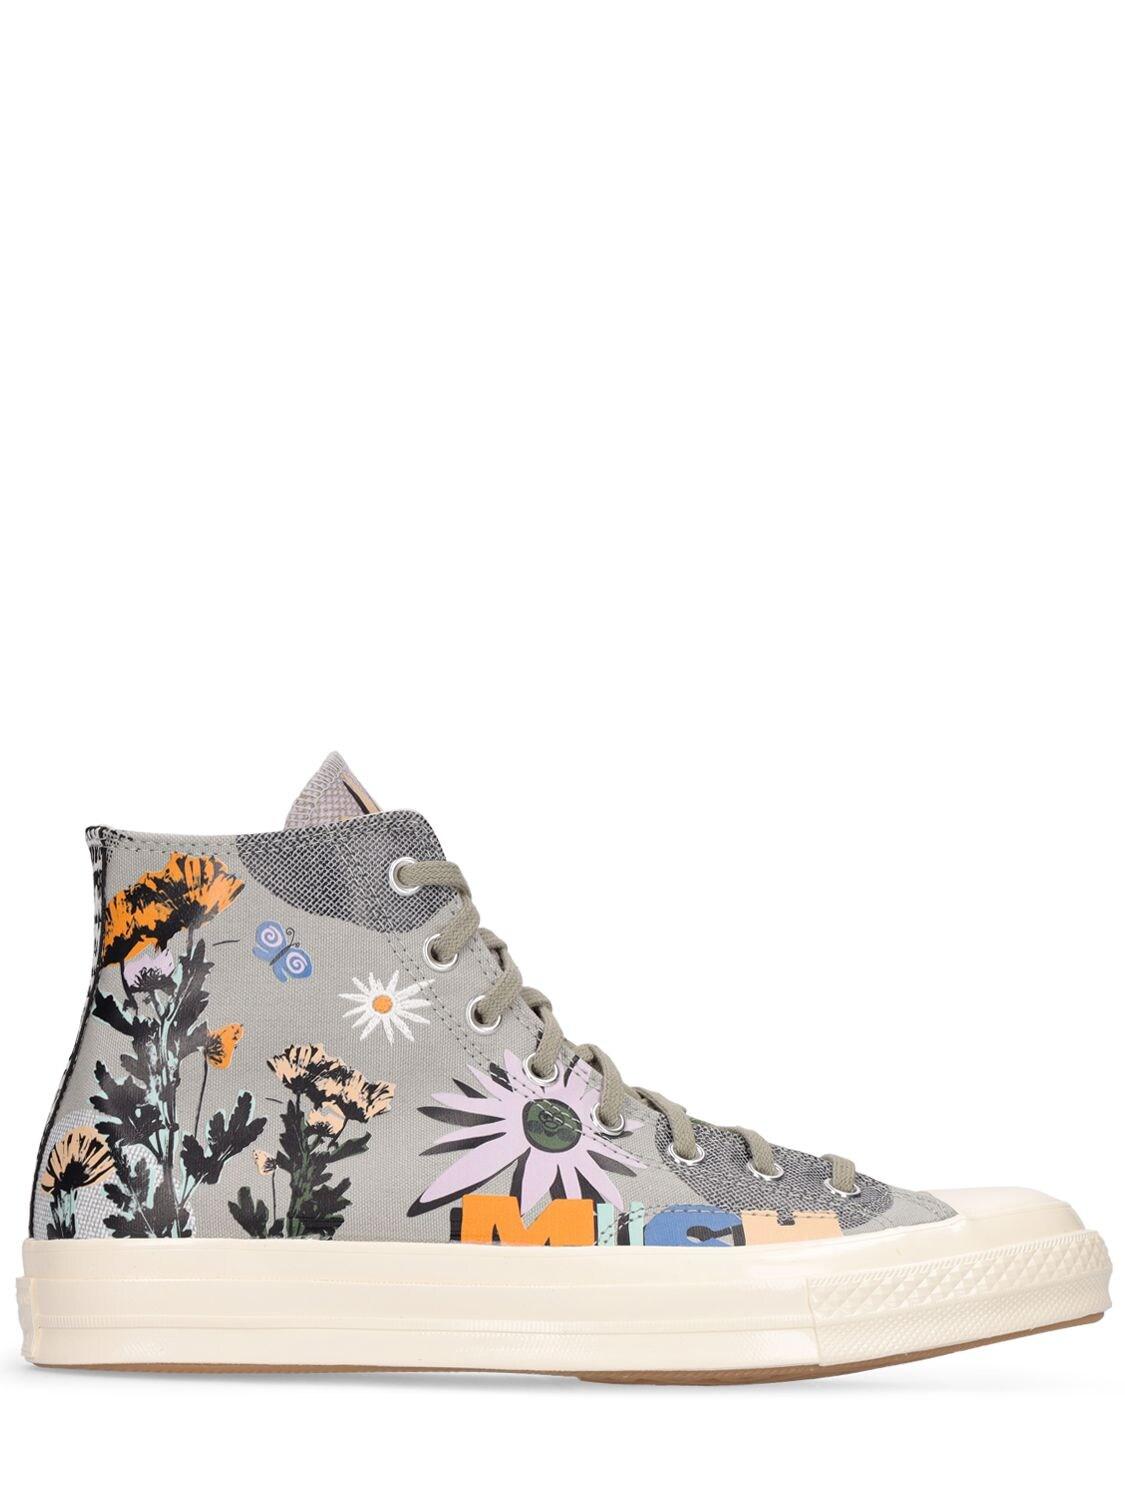 Converse Much Love Chuck 70 Sneakers | Lyst